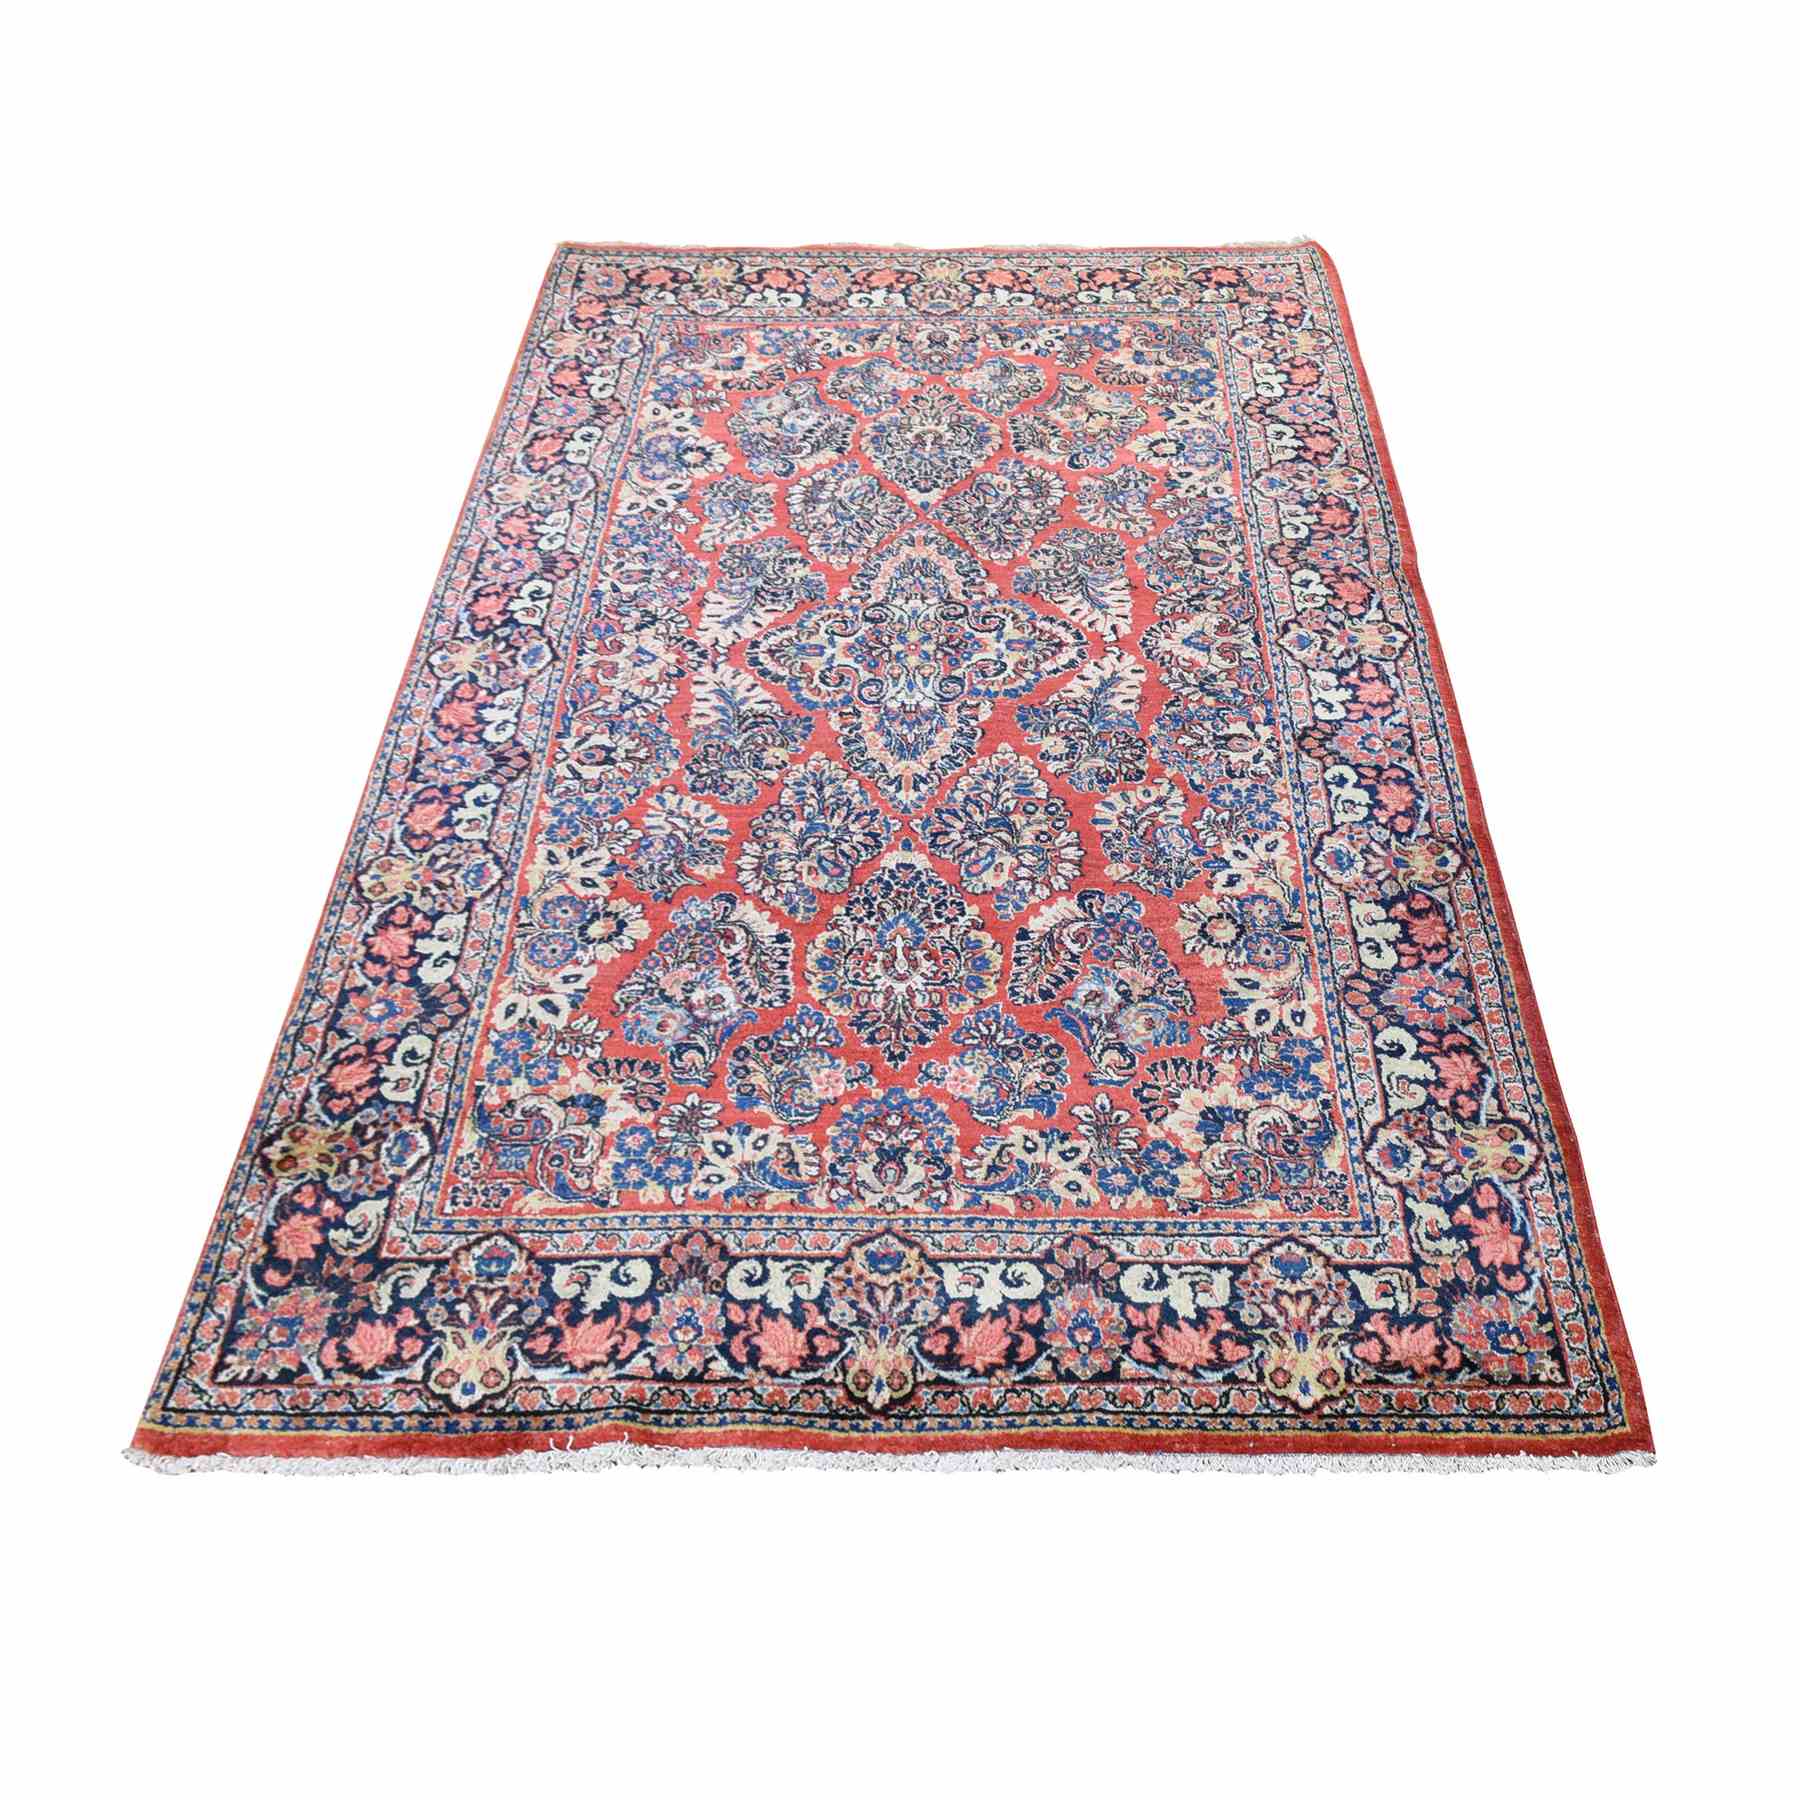 Antique-Hand-Knotted-Rug-400005